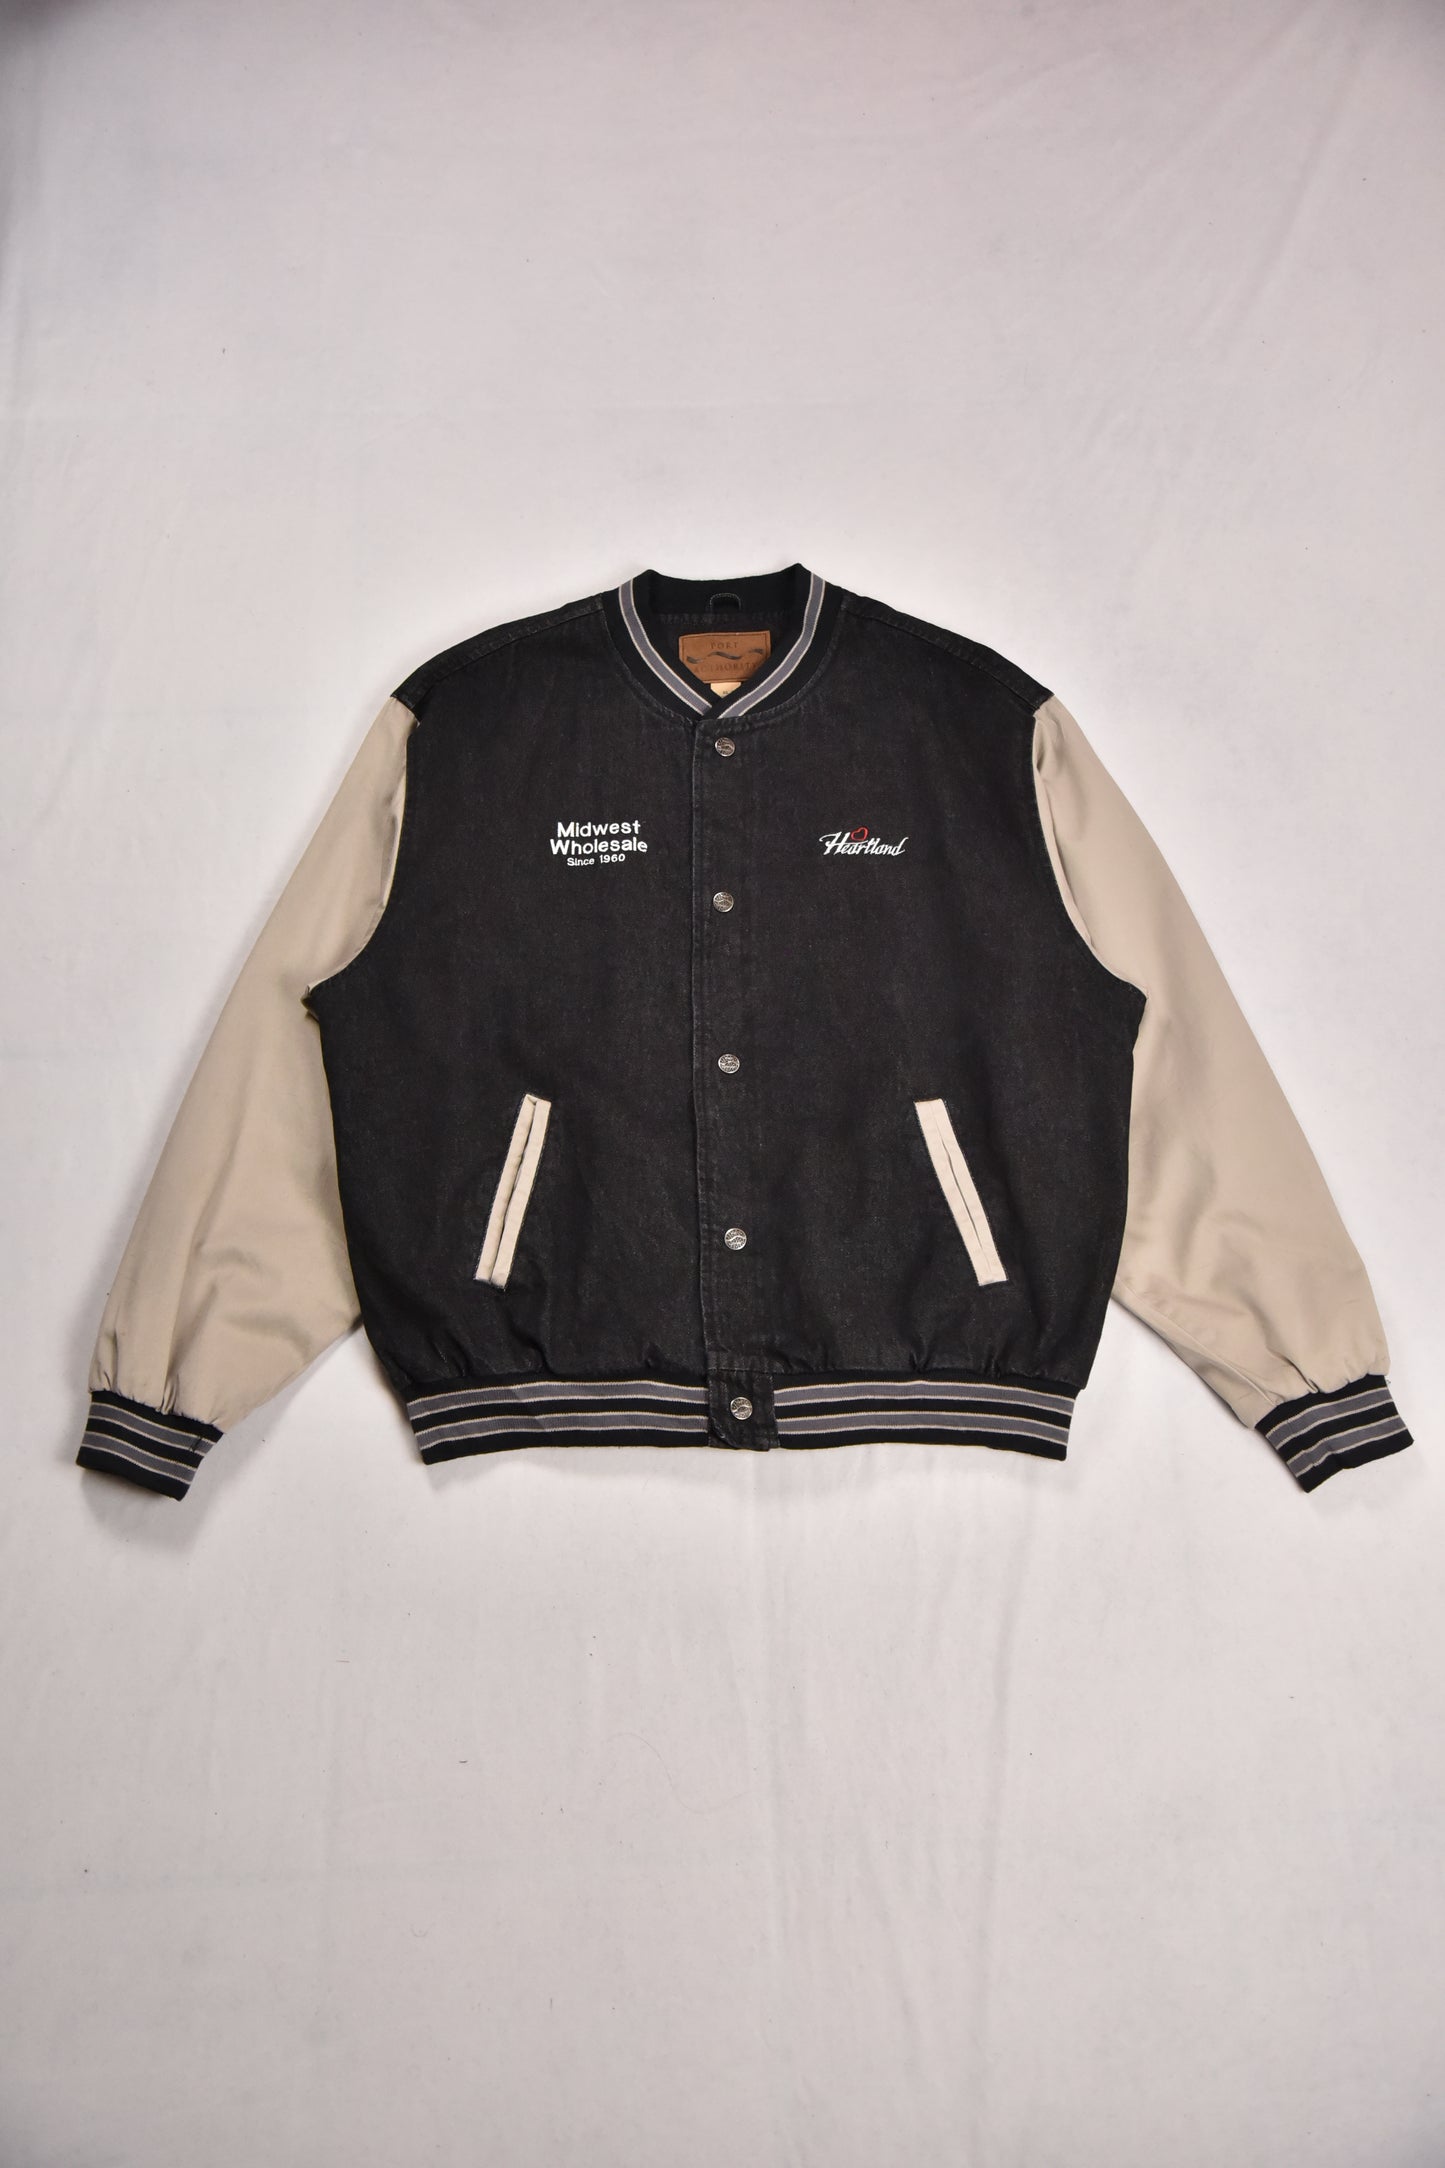 Giacca college vintage "Heartland" / XL